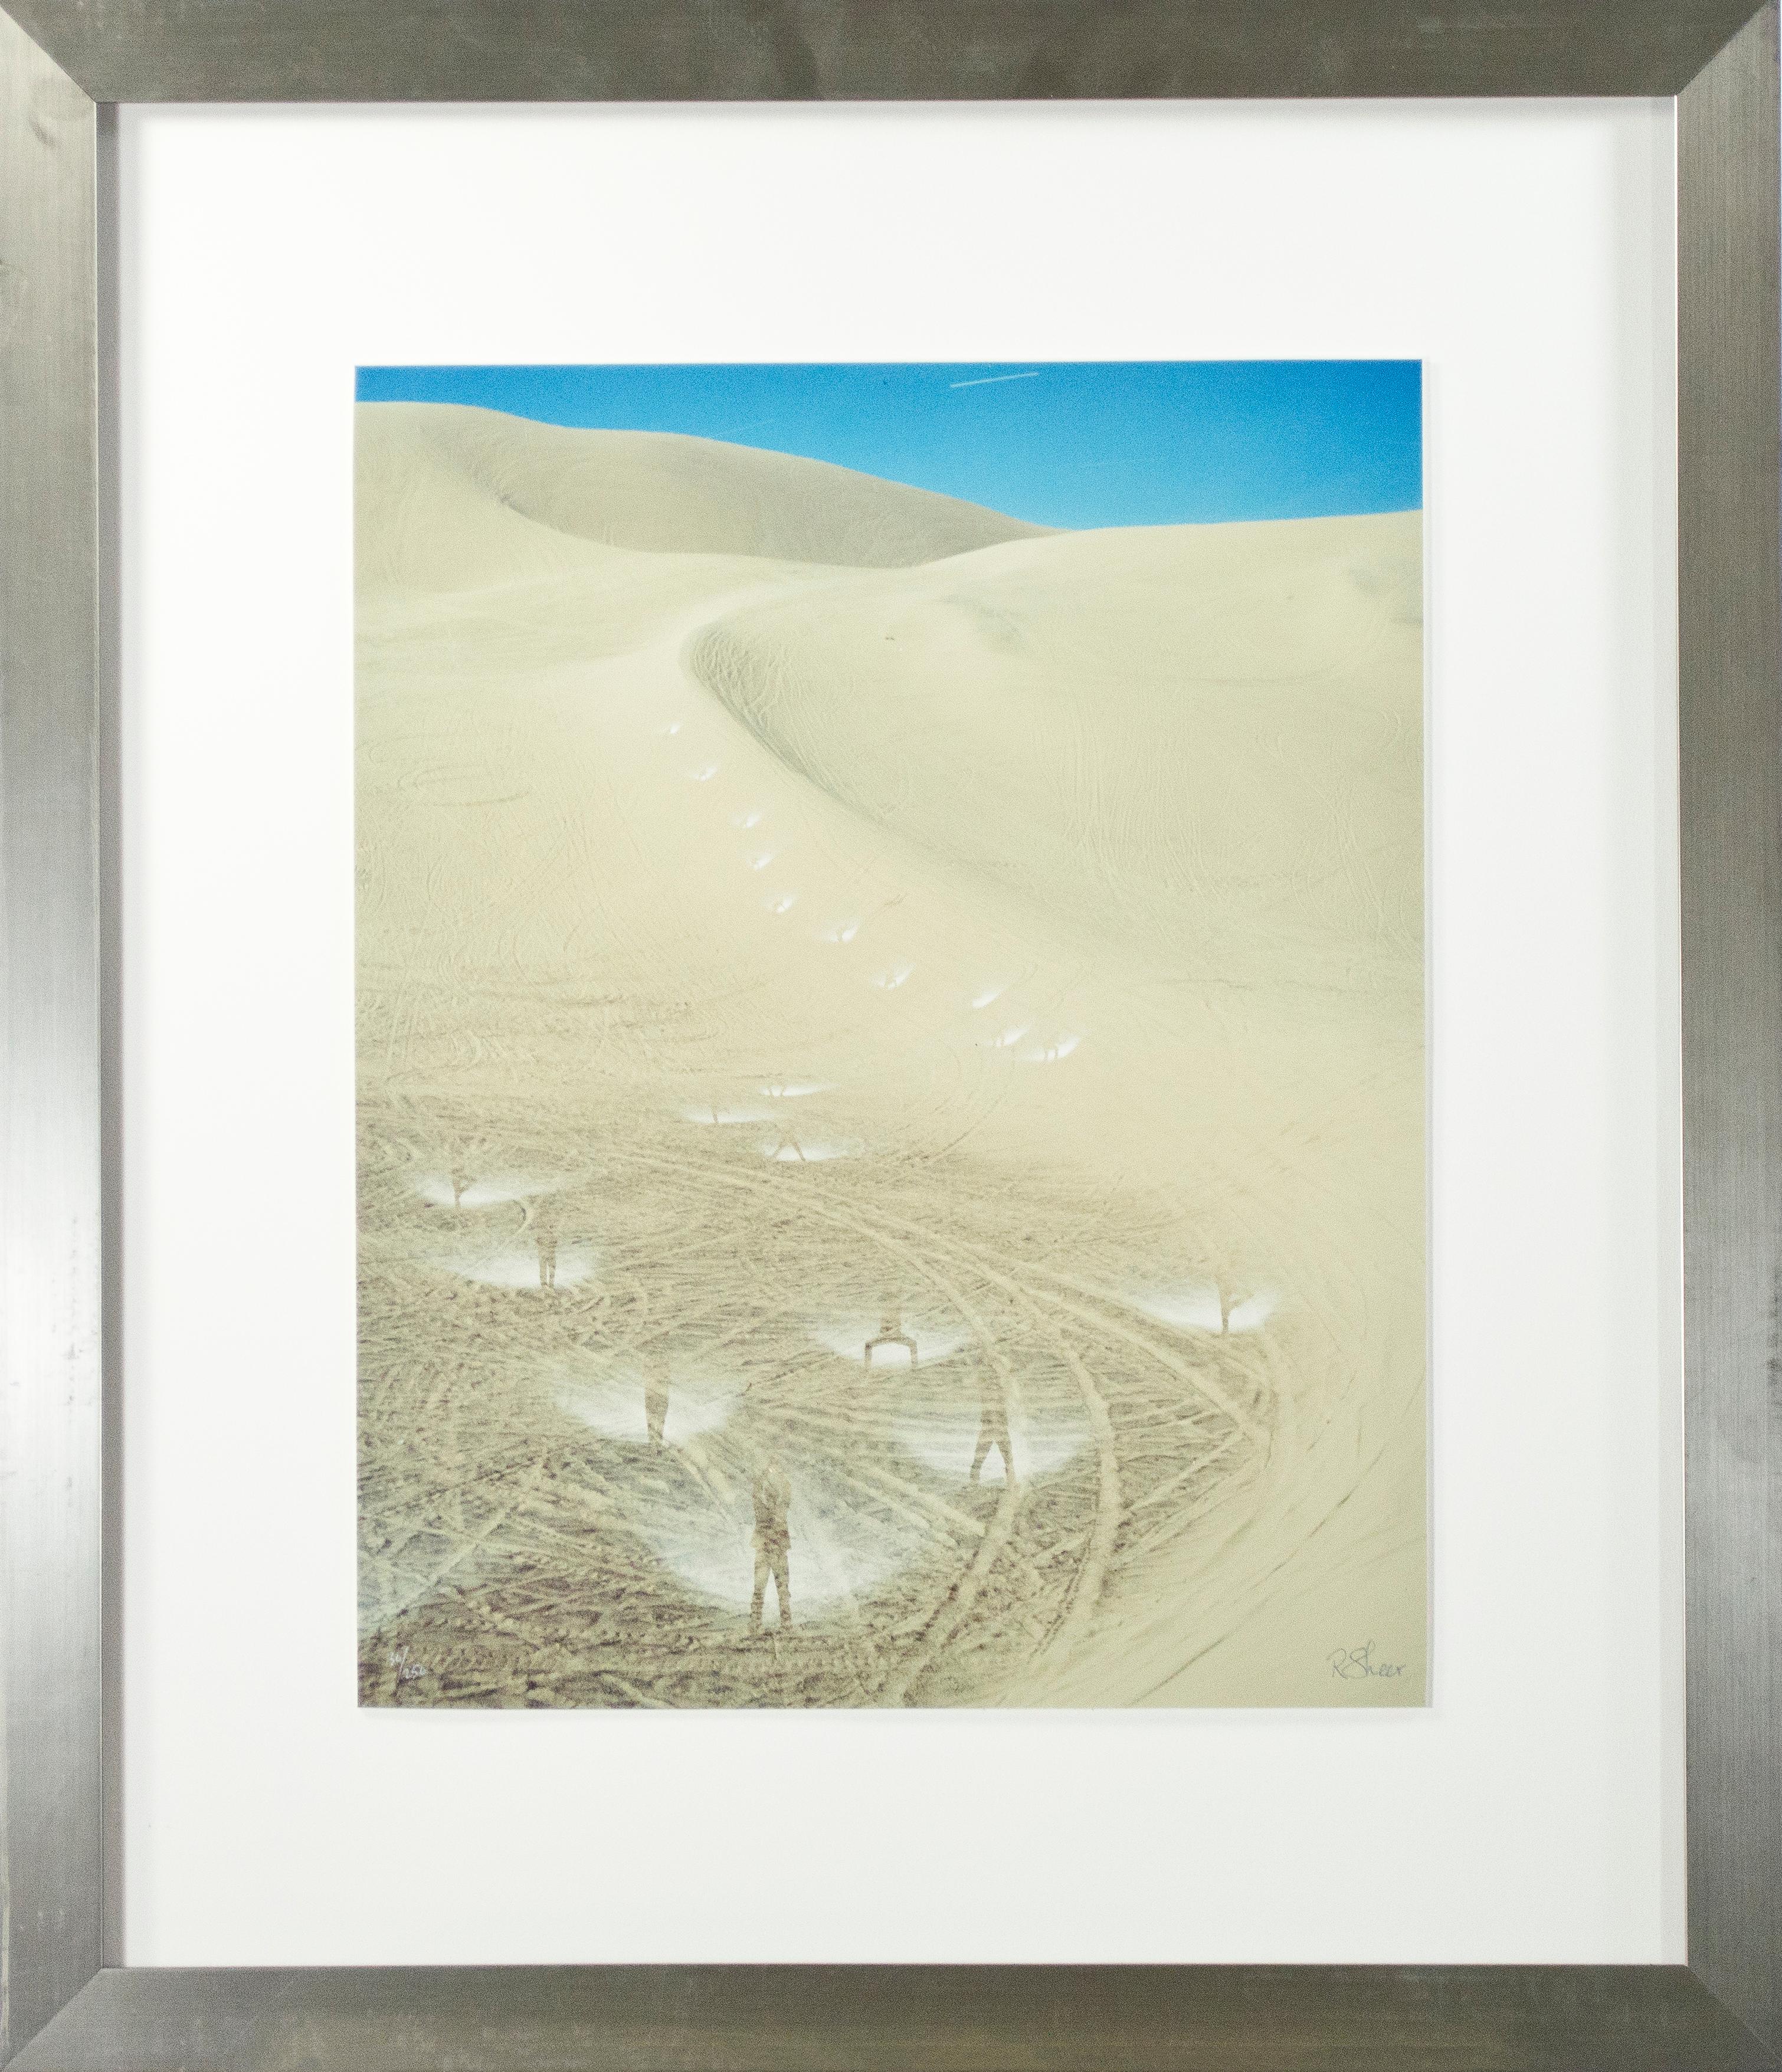 'Yoga Dunes' exemplifies the long-exposure photography of Robert Kawika Sheer. In the image, across an arabesque sand dune, silhouettes of the artist perform yoga, each figure drawing the viewer's eye into the distance. The long-exposure of the